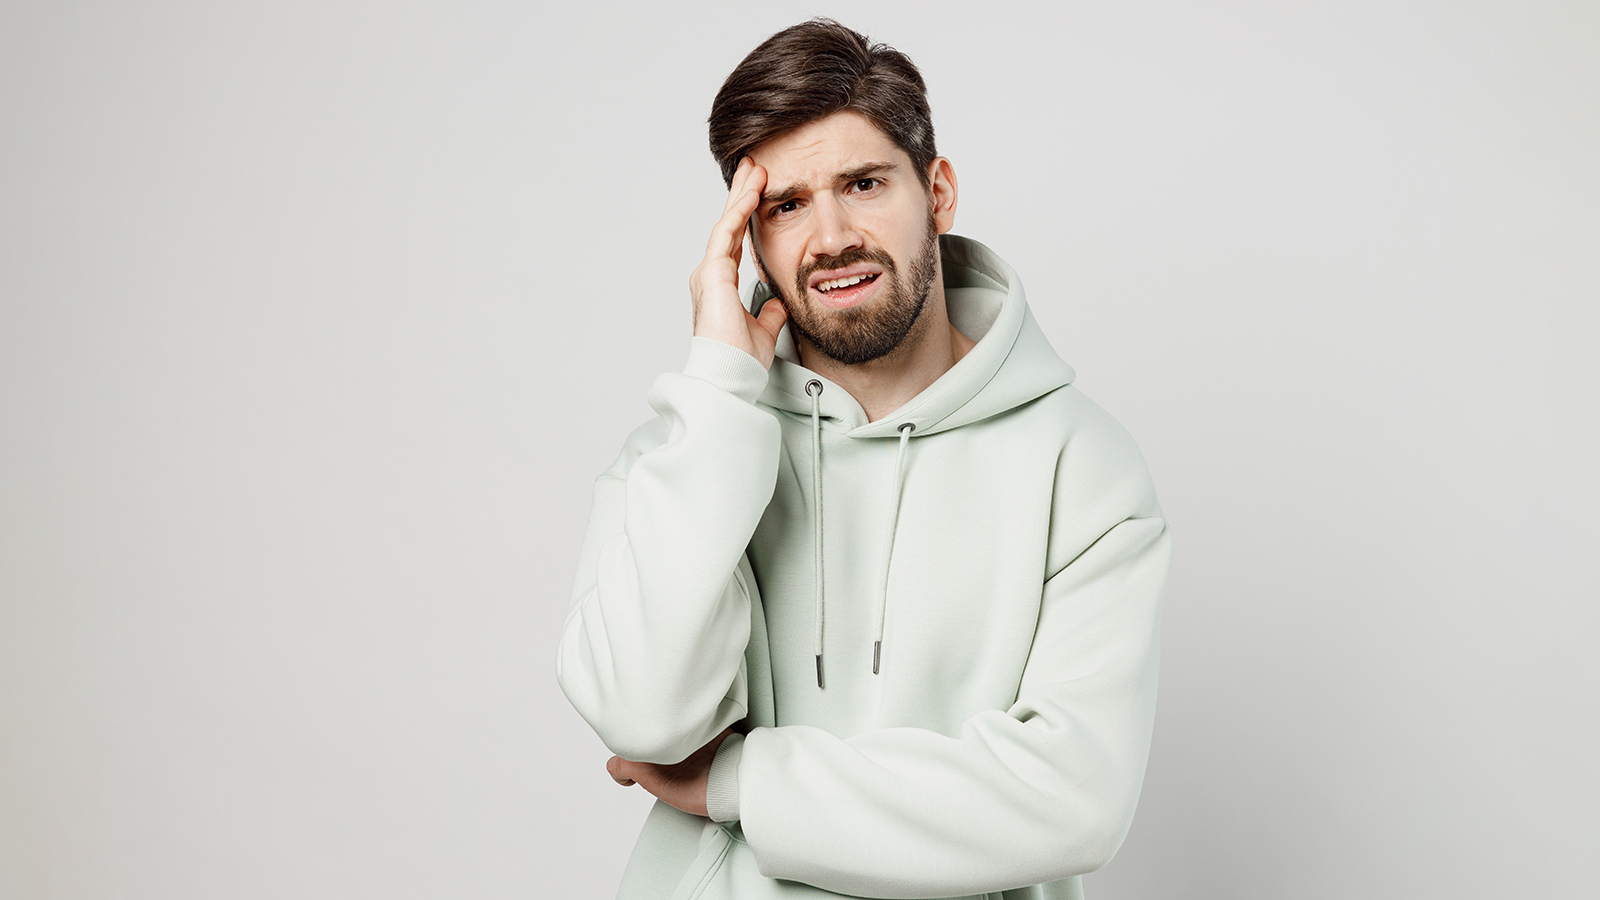 Young dissatisfied sad mistaken depressed unshaven caucasian man wear mint hoody look camera prop up forehead head isolated on plain solid white background studio portrait. People lifestyle concept